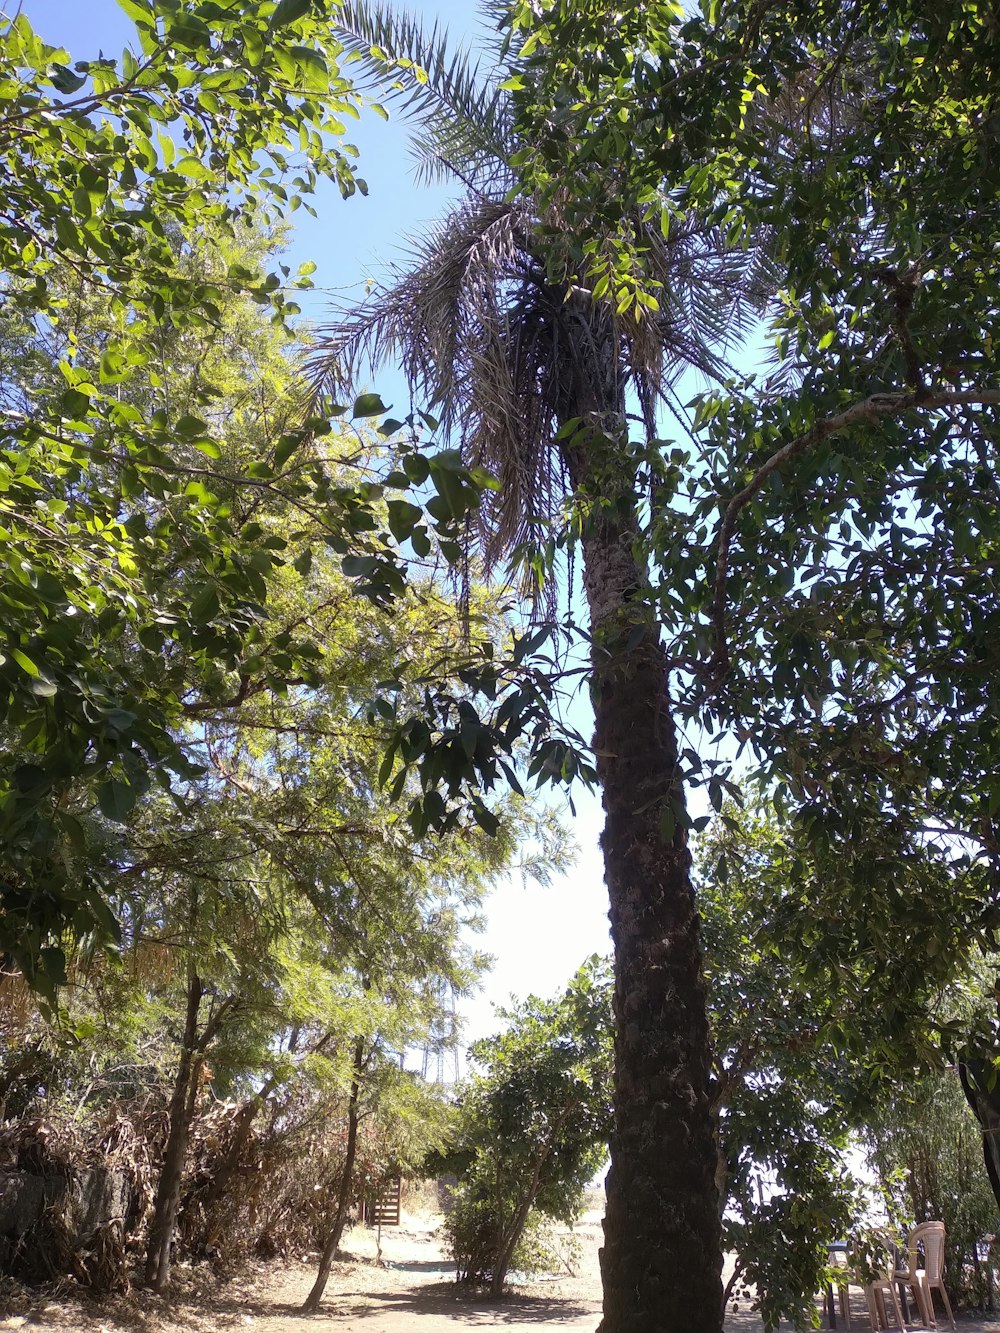 a palm tree in the middle of a park